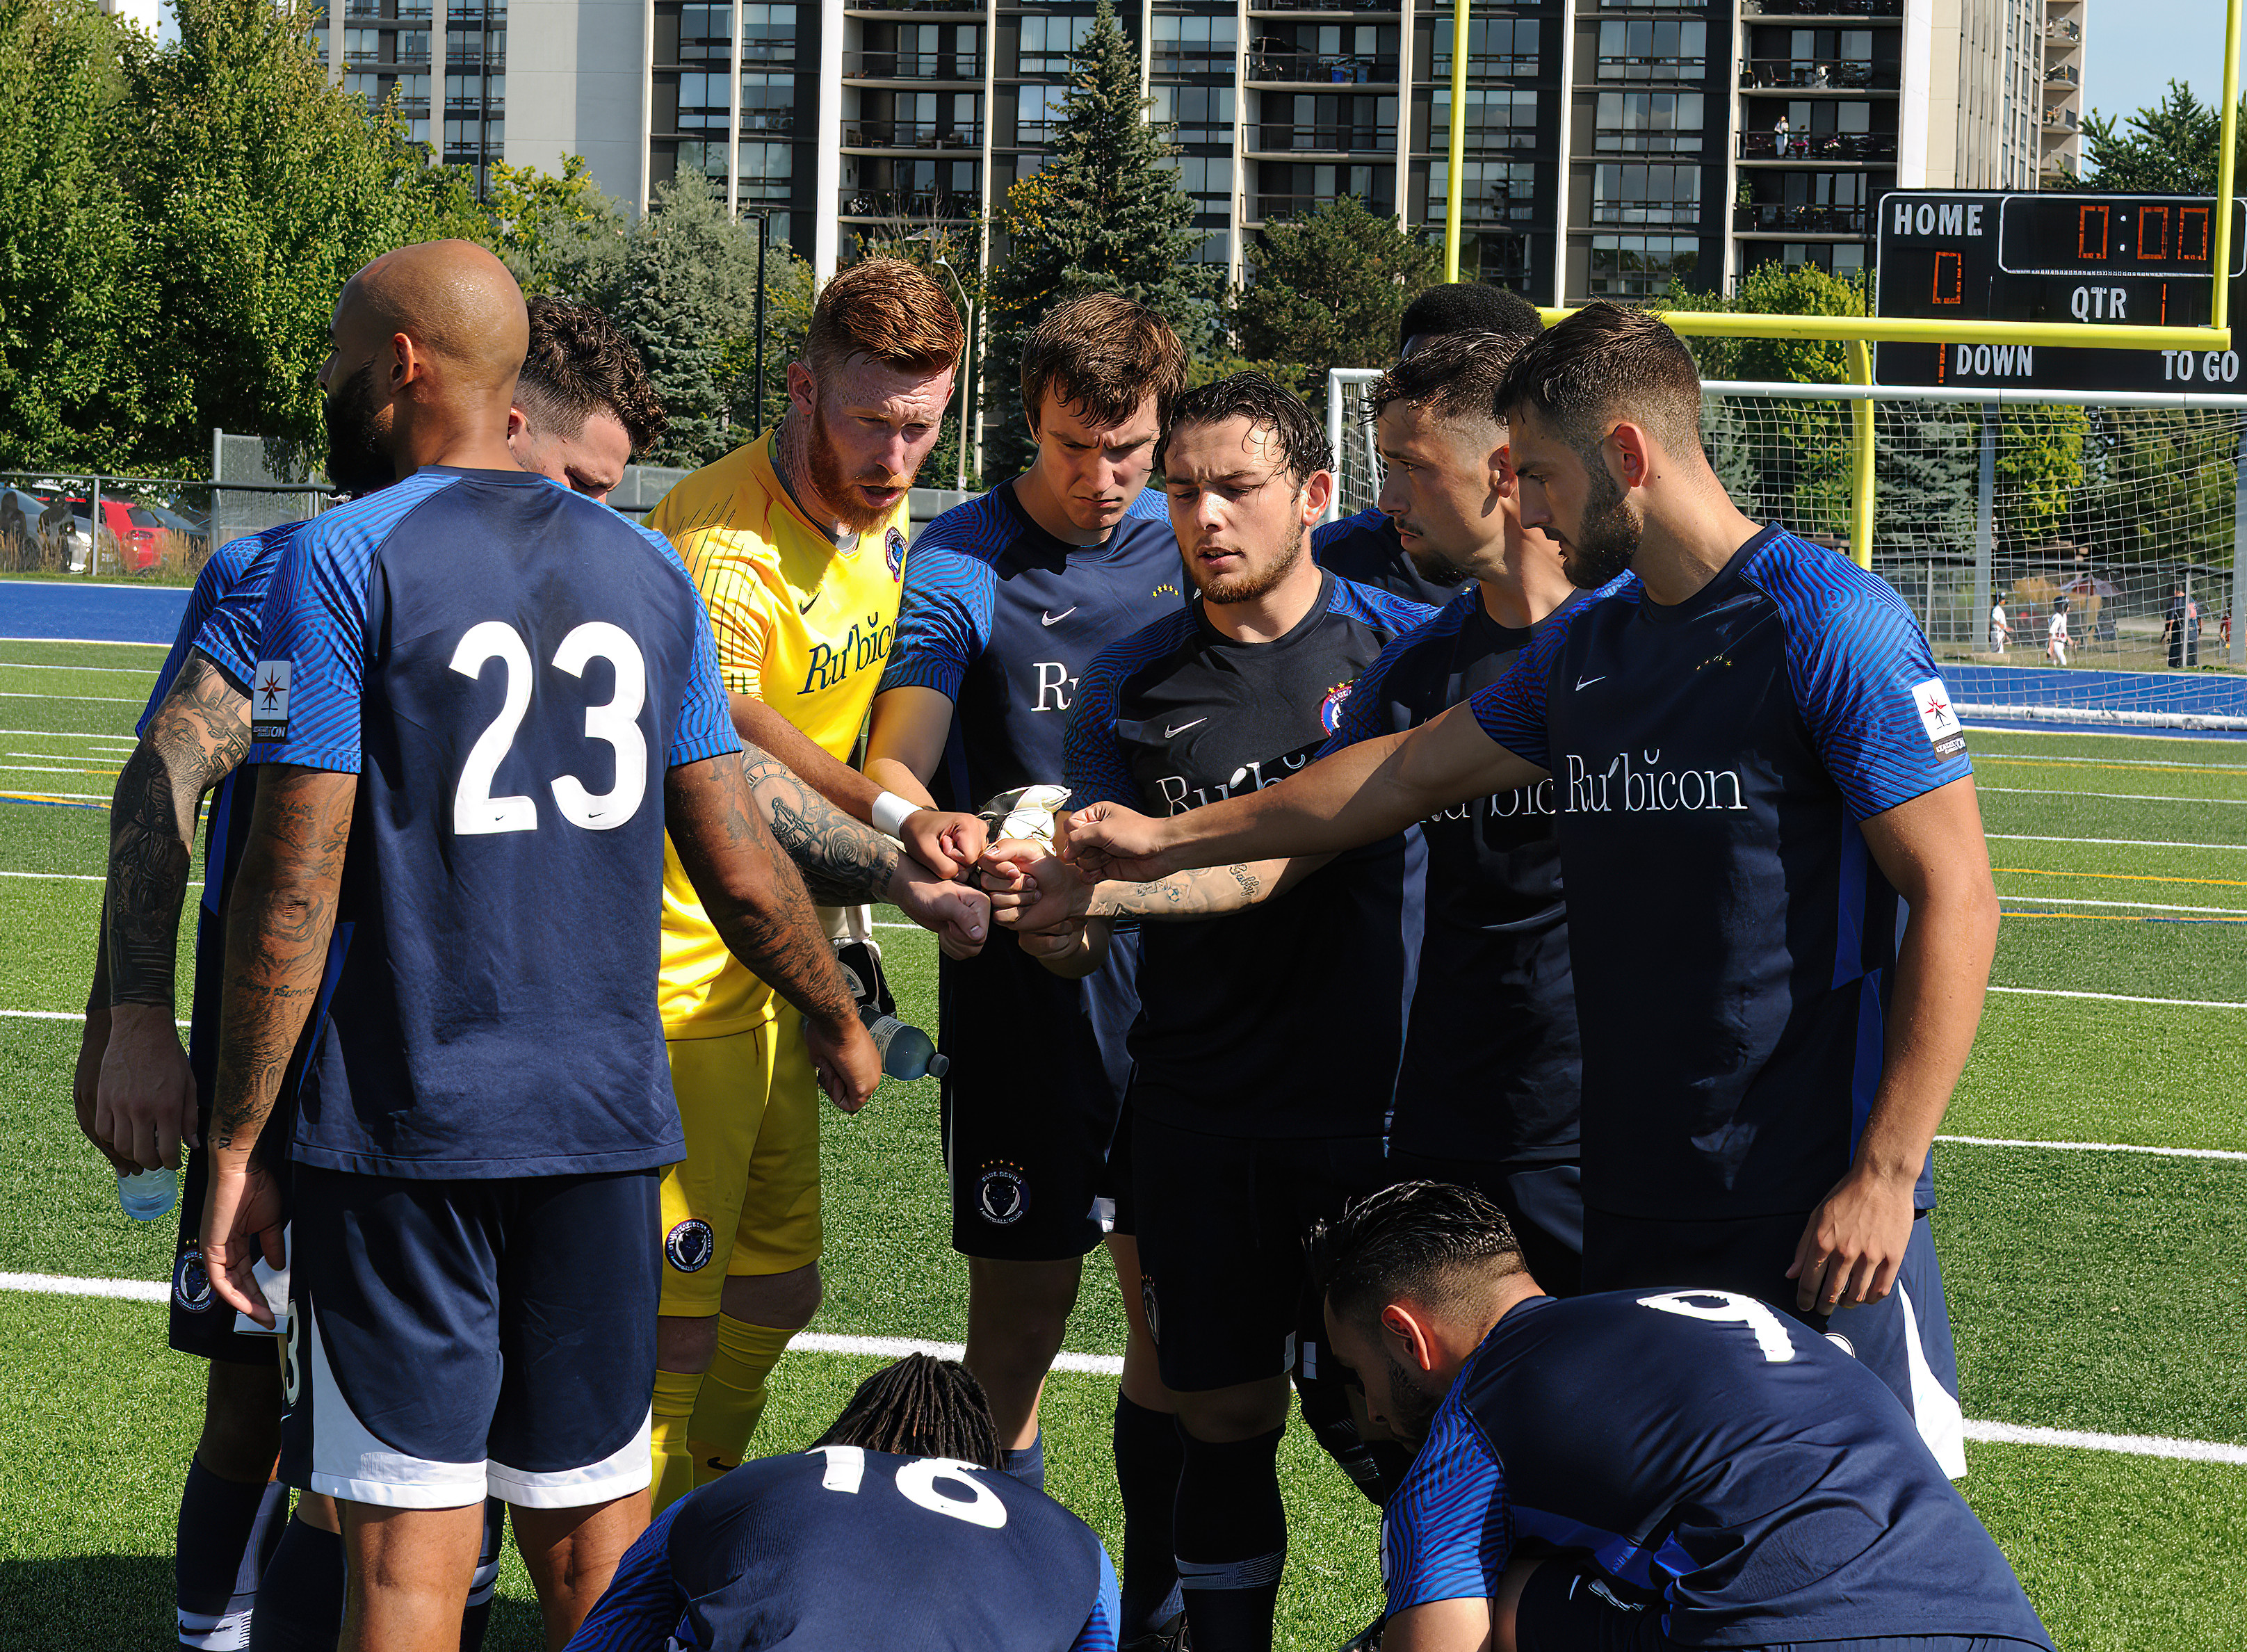 If Blue Devils FC can win today they will secure a birth in the Canadian Championship next spring. | A victory today will see Blue Devils FC take their 3rd League1 Ontario Championship, grant them entry into the Canadian Championship for the second time in the club